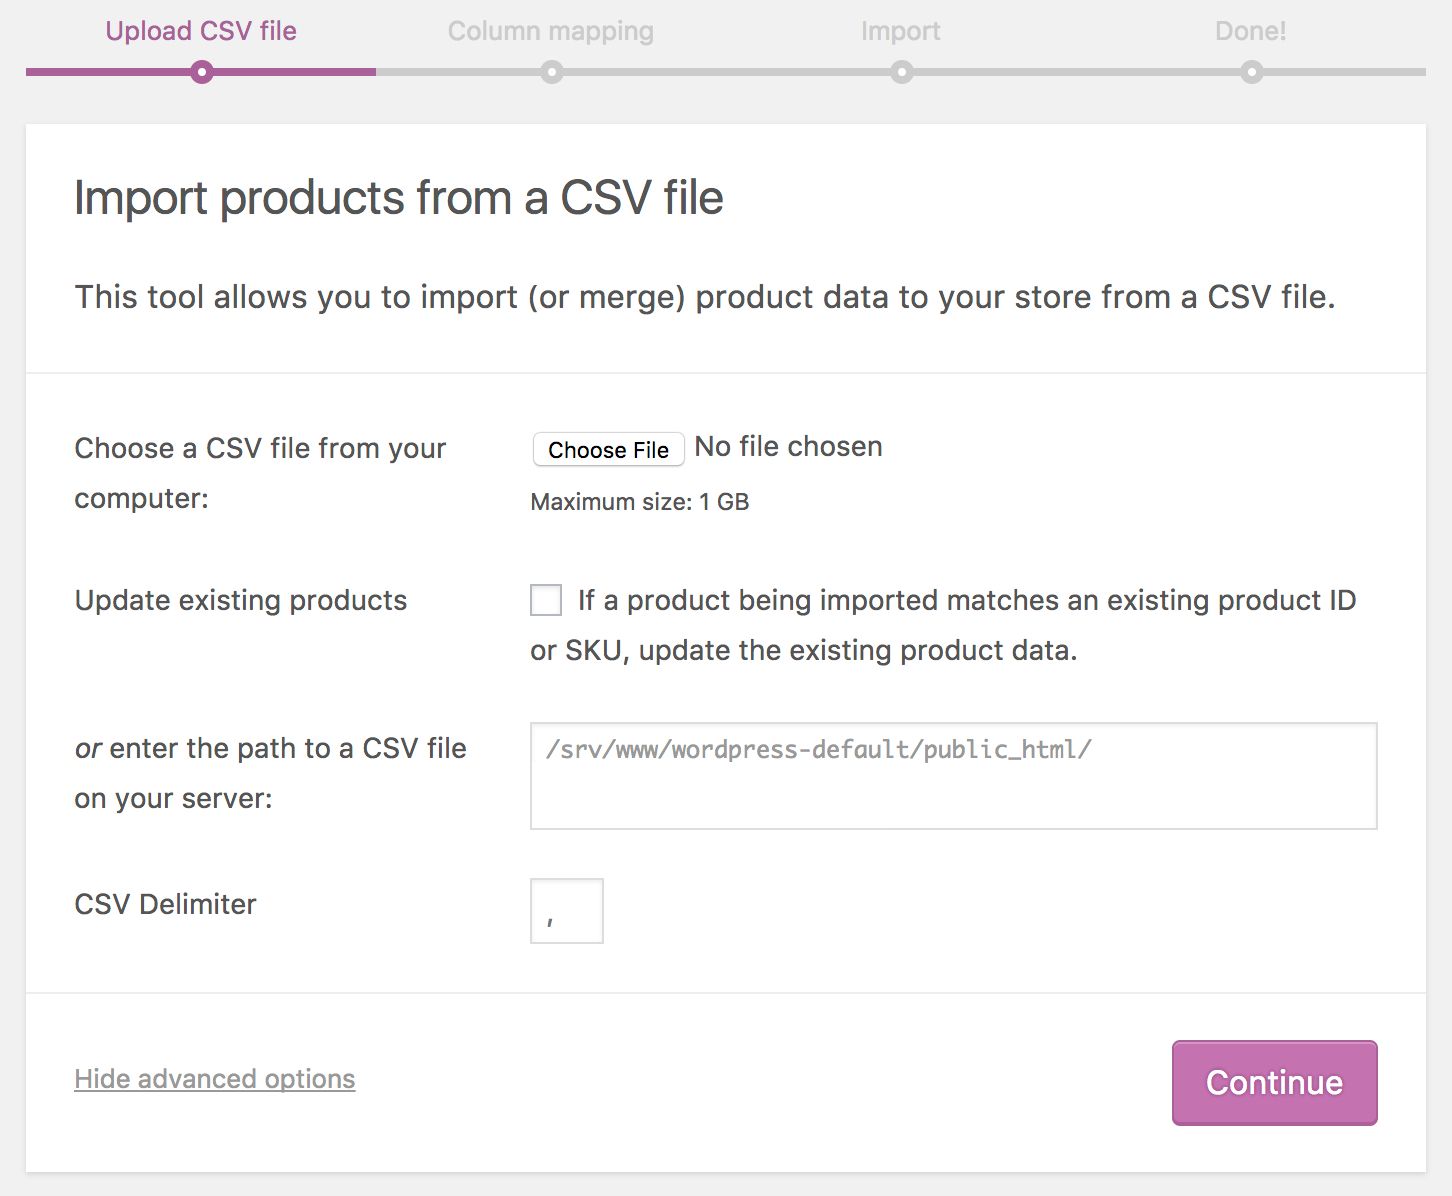 Importing products from your CSV is critical to setting up an ecommerce website